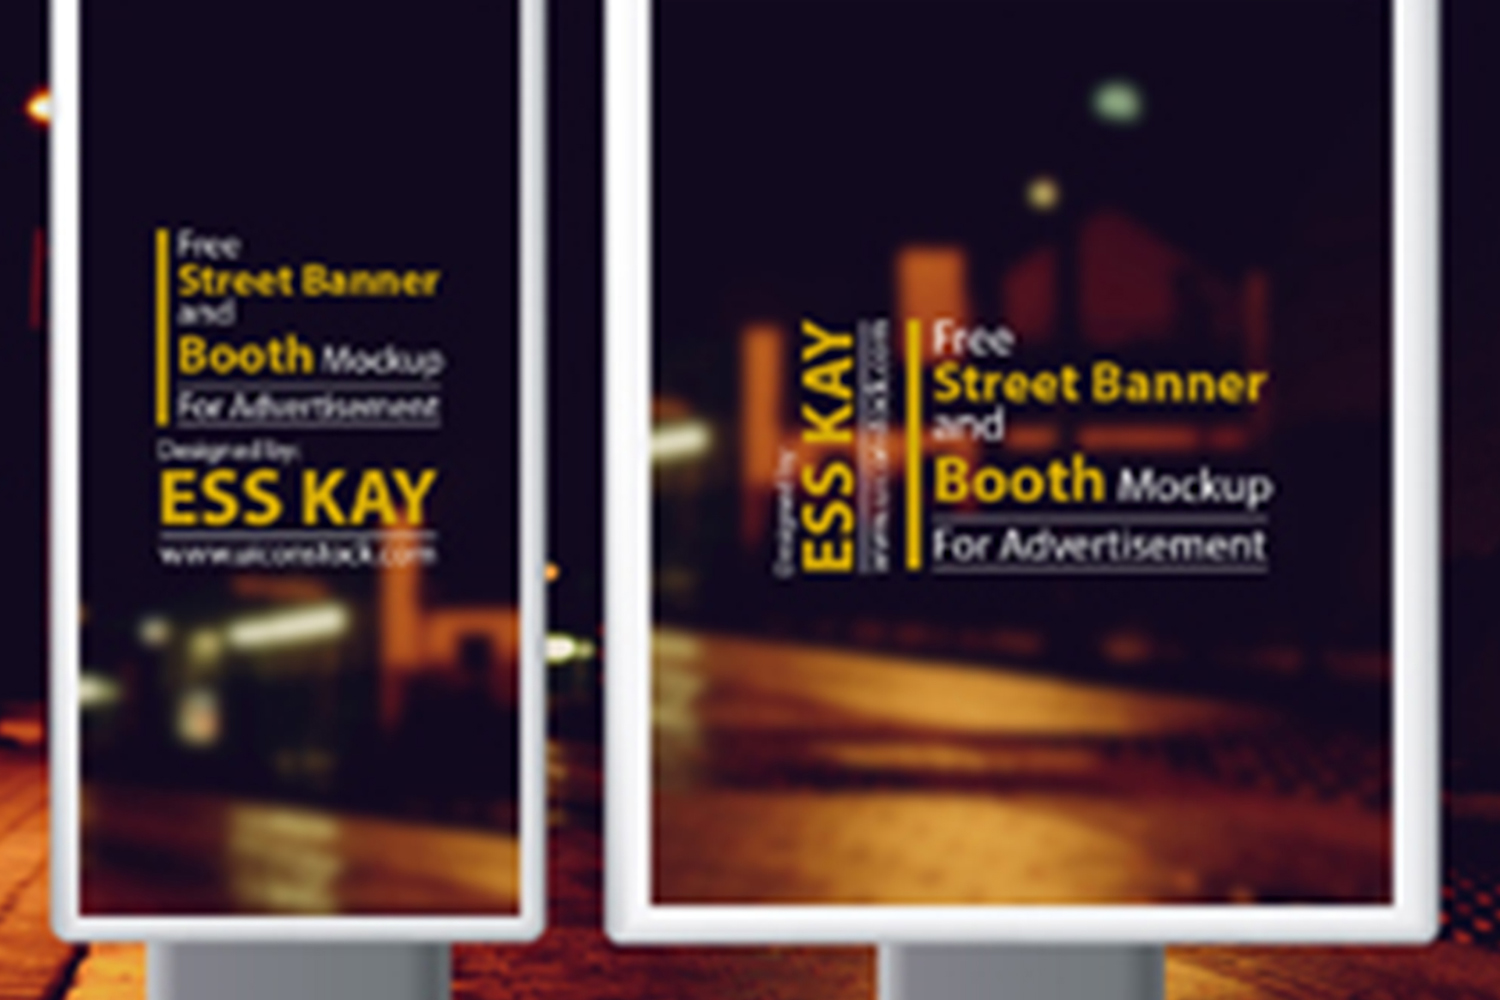 Street Banner and Booth Advertisement Mockup Free Download